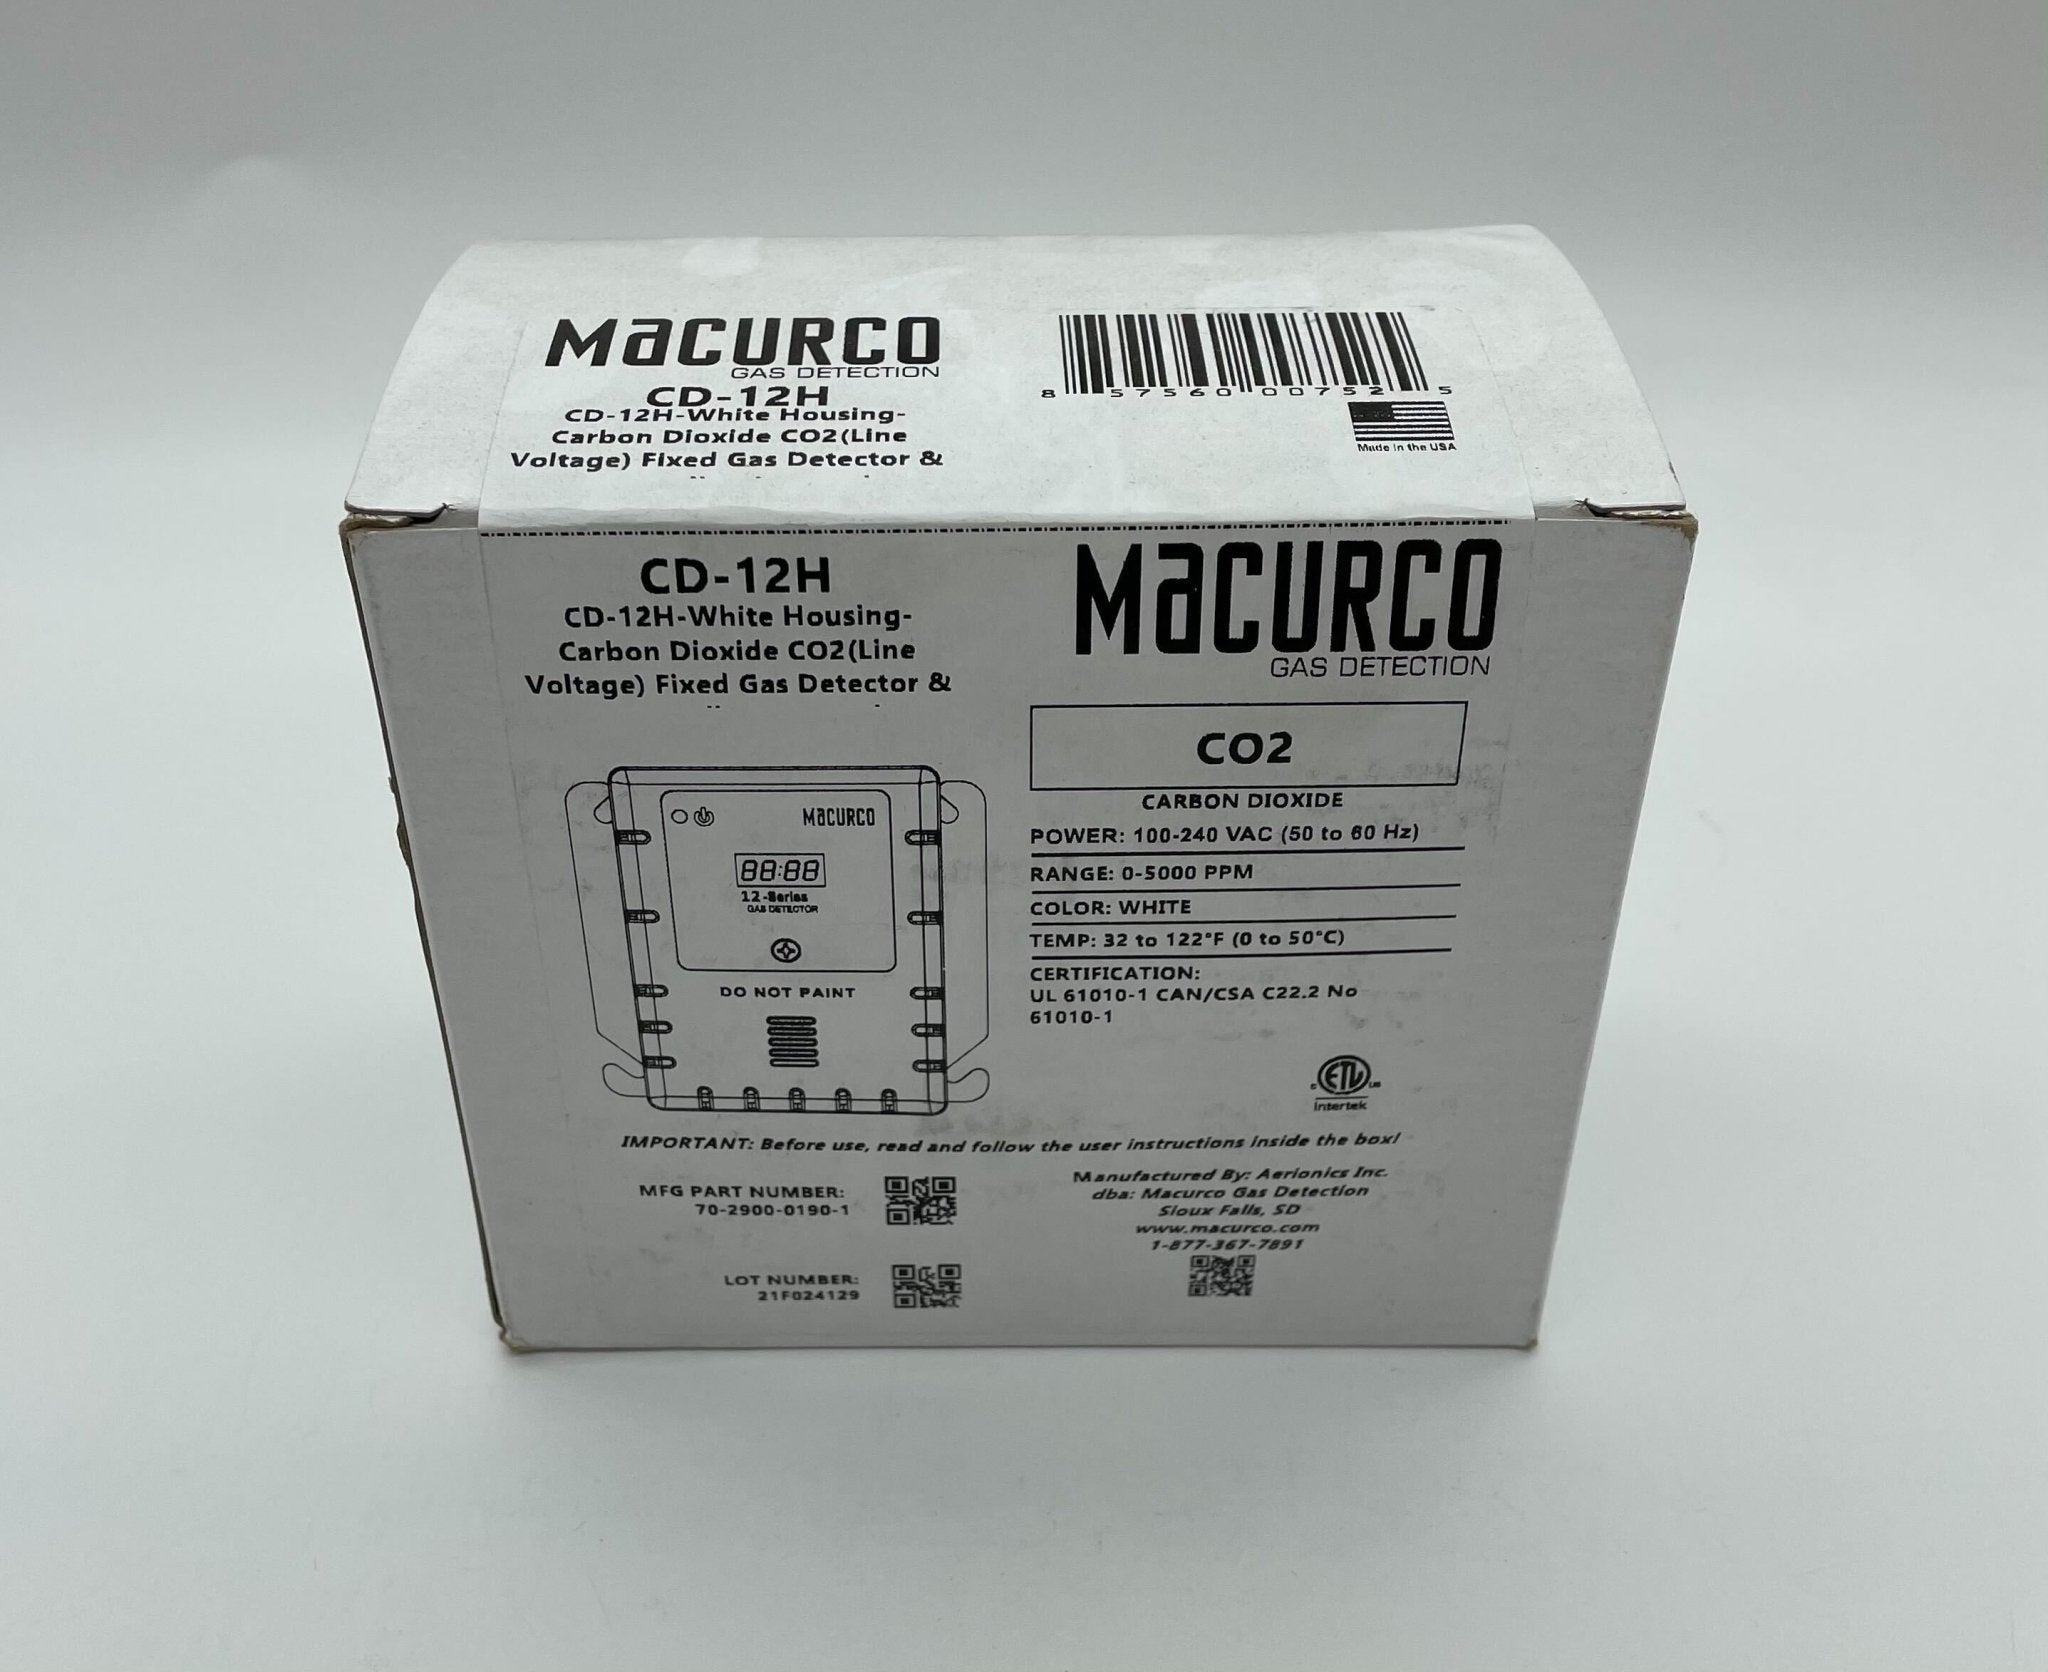 Macurco CD-12H Carbon Dioxide Detector - The Fire Alarm Supplier